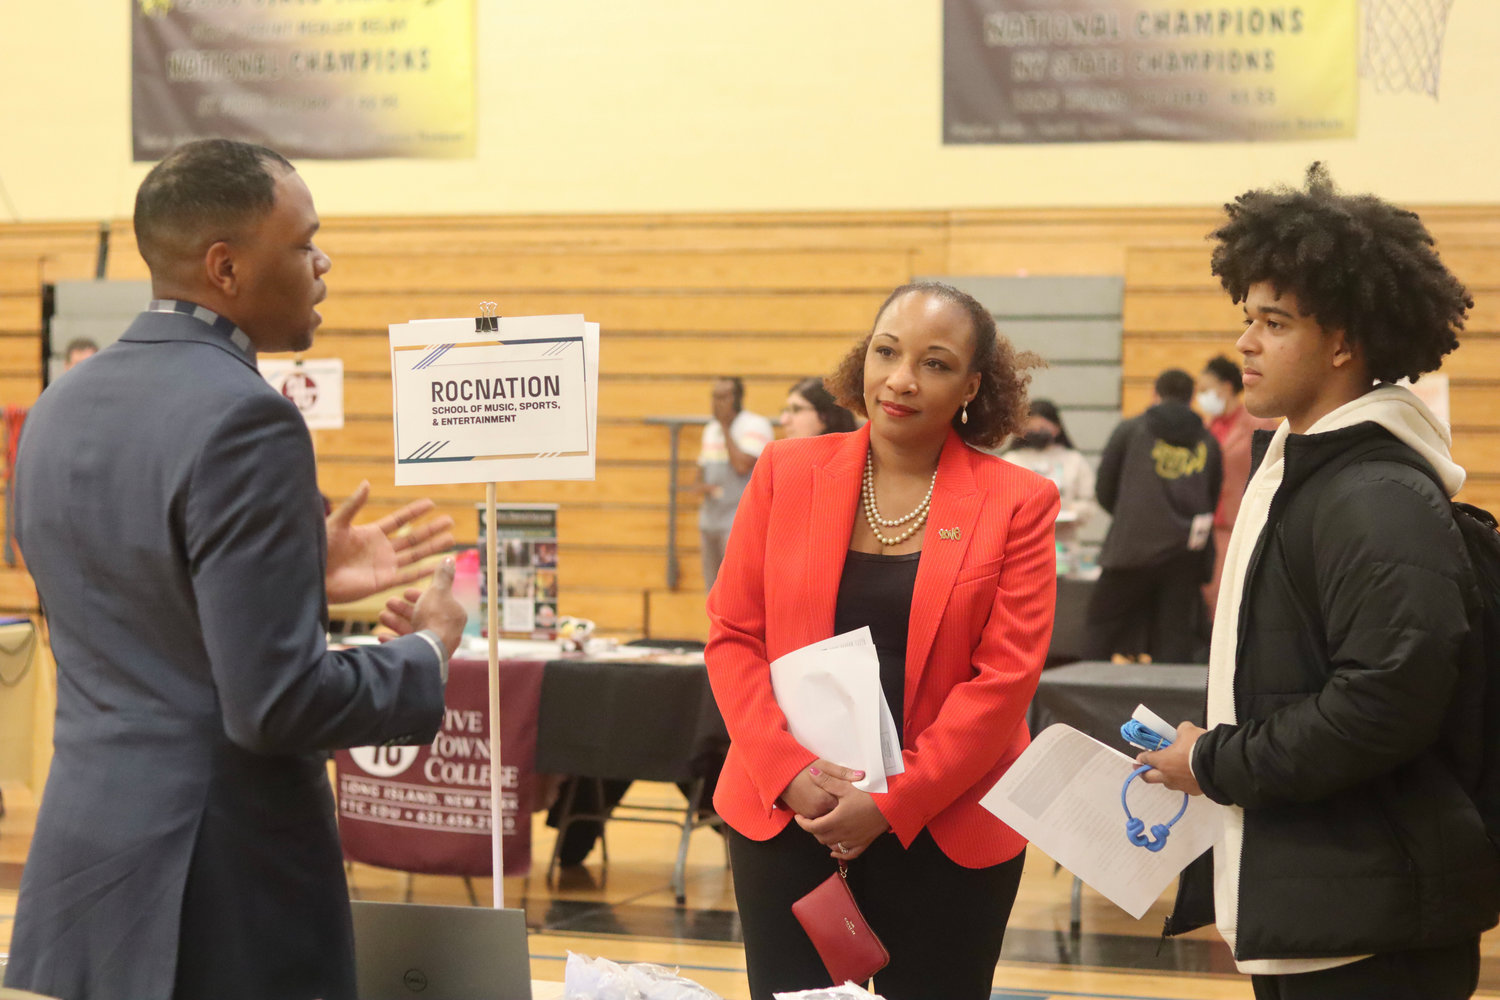 Dr. Monique Darrisaw-Akil, center, spoke with students at the March 31 career fair, which was sponsored by the New York State My Brother’s Keeper organization.